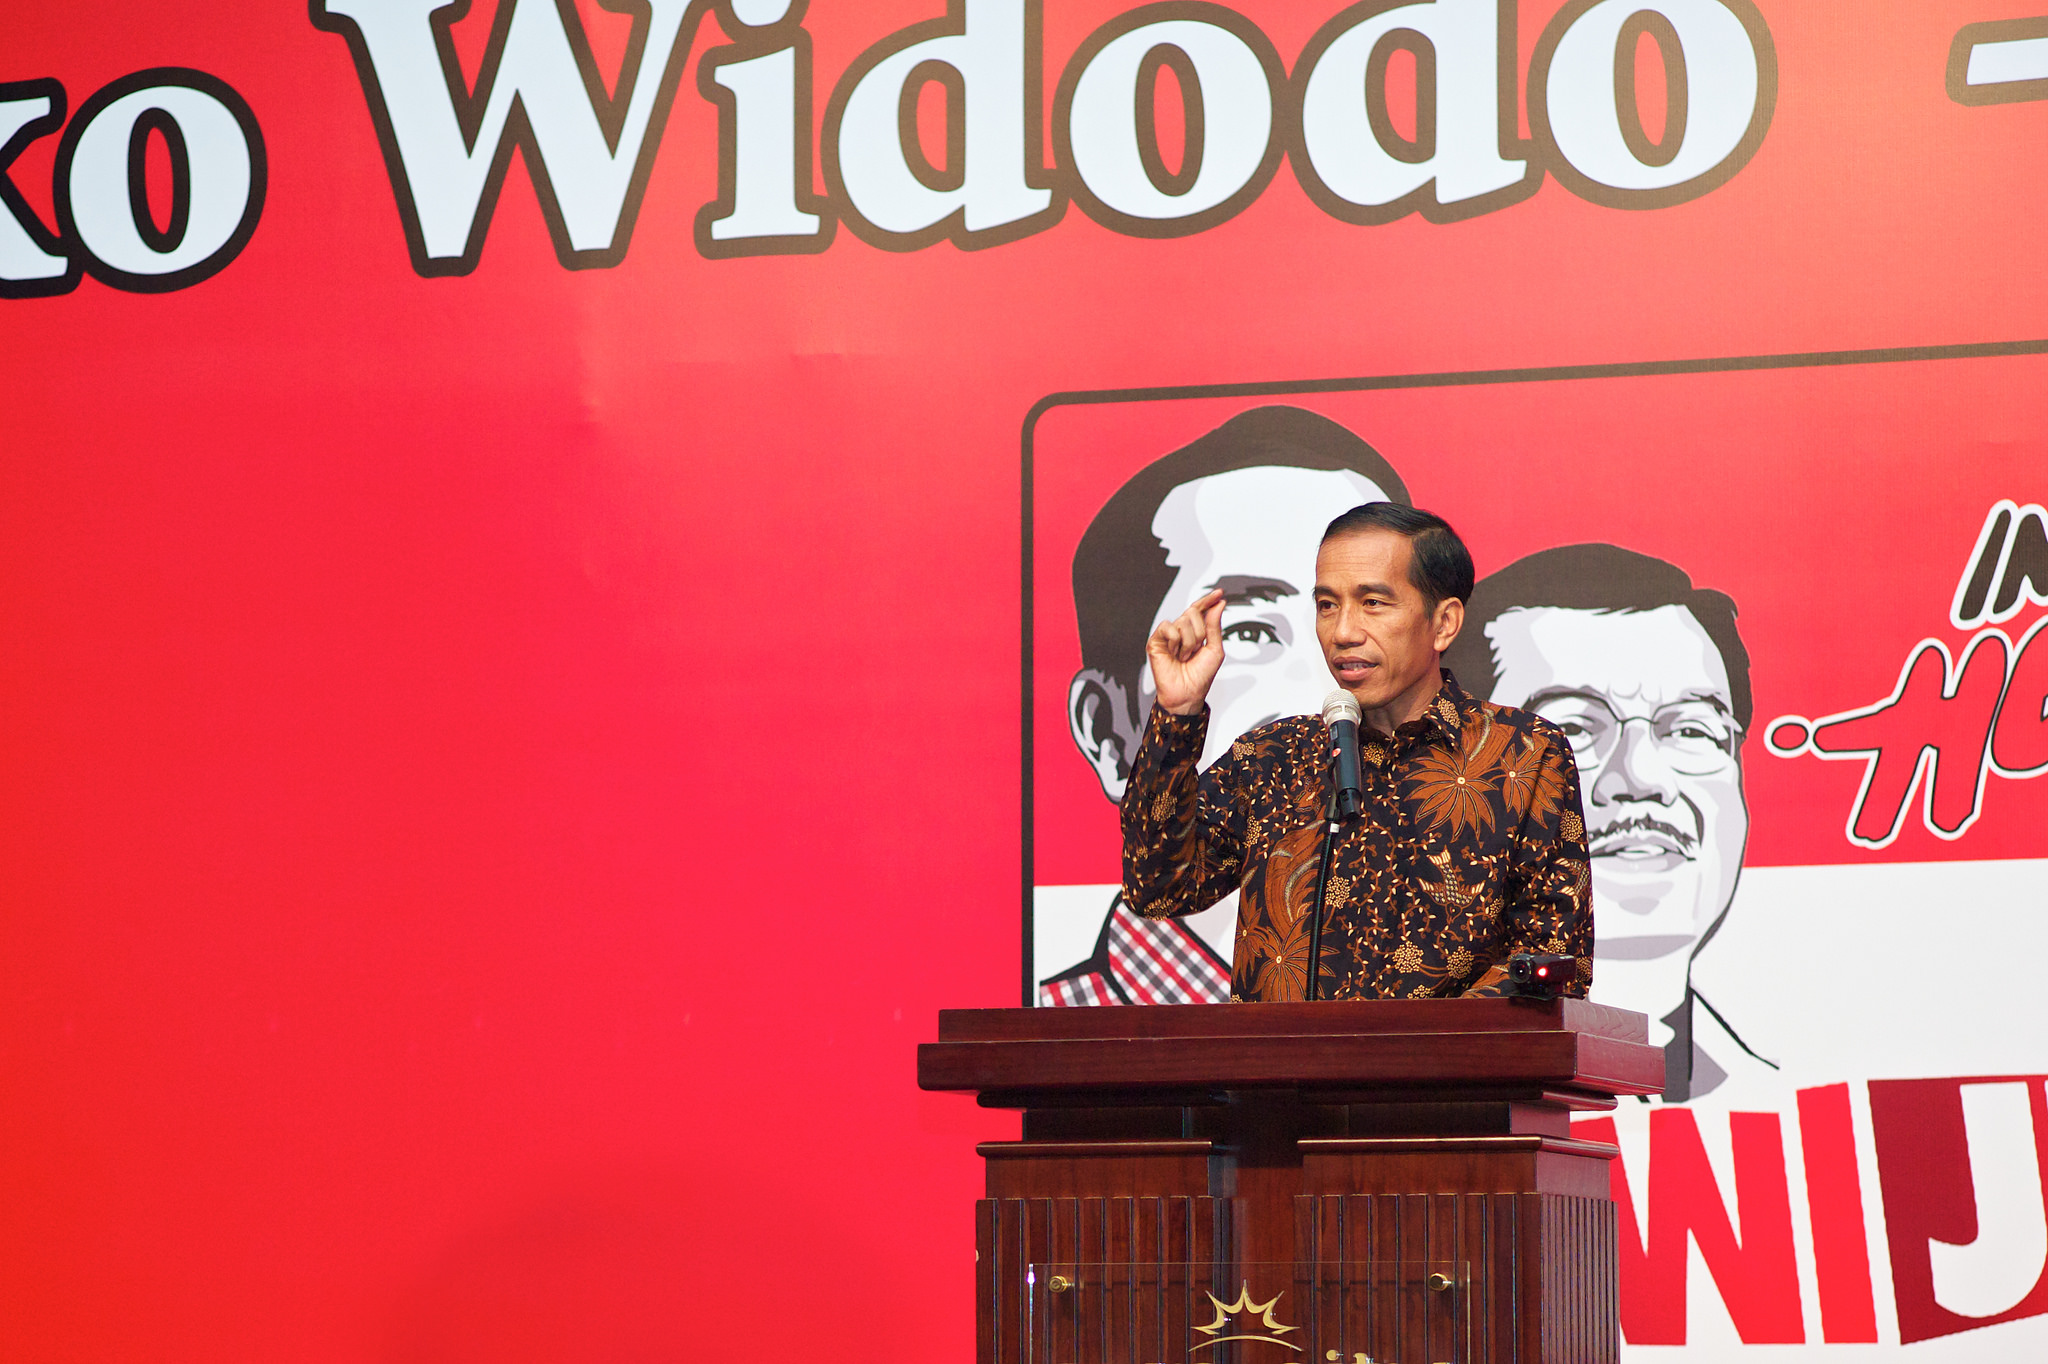 President Joko Widodo speaks at a podium, with a red banner as a backdrop.